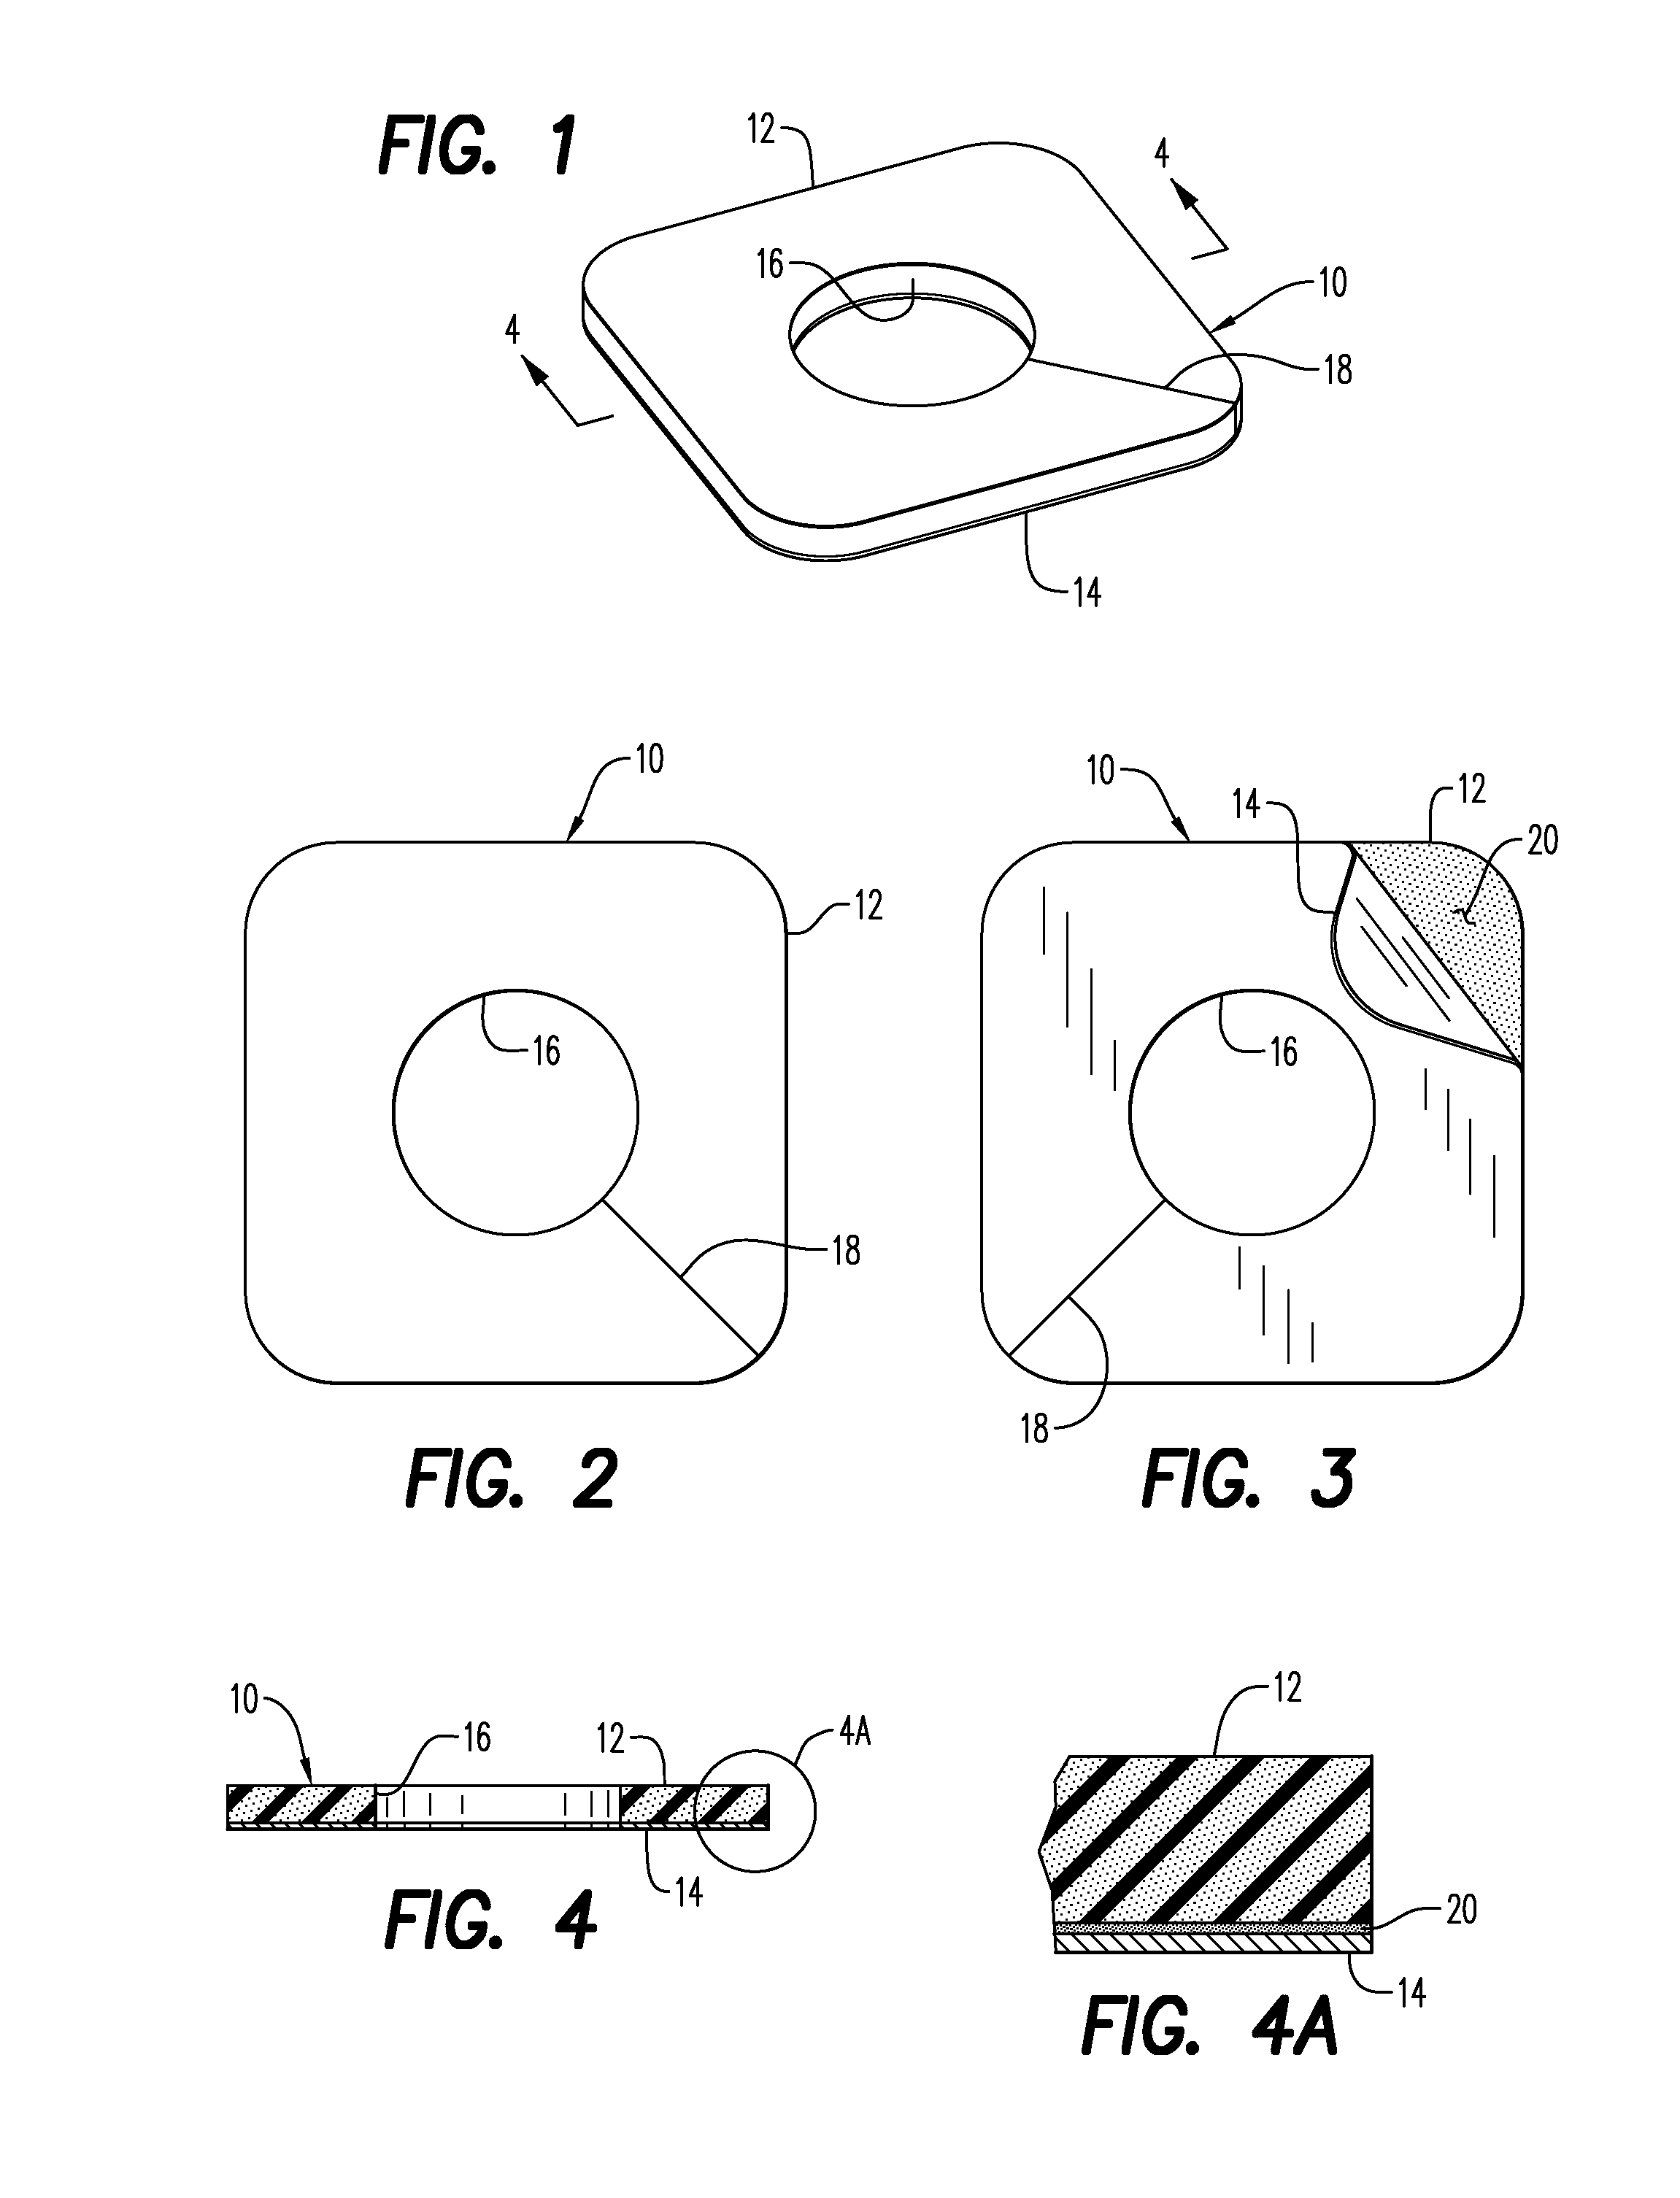 Method of Reducing Infections and/or Air Embolisms Associated with Vascular Access Procedures